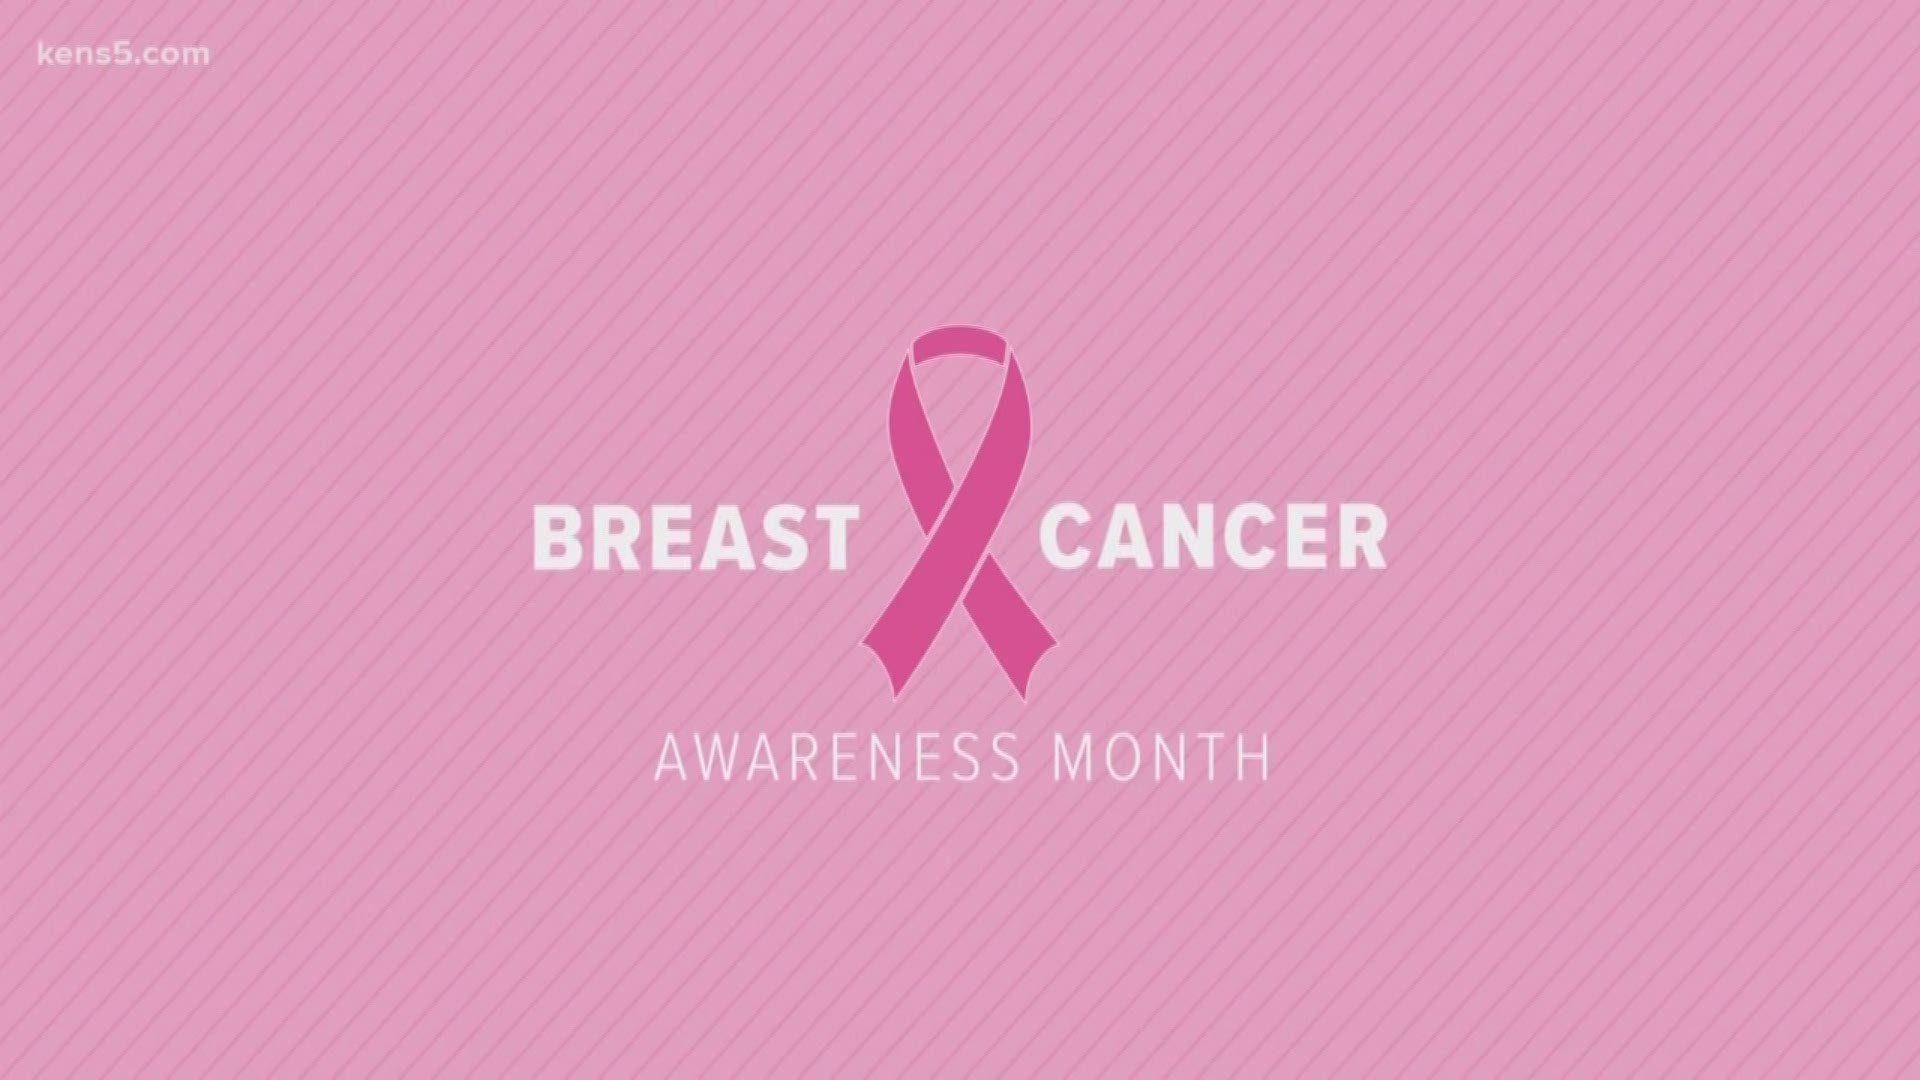 Eyewitness News Reporter Erica Zucco shares more on Breast Cancer Awareness.